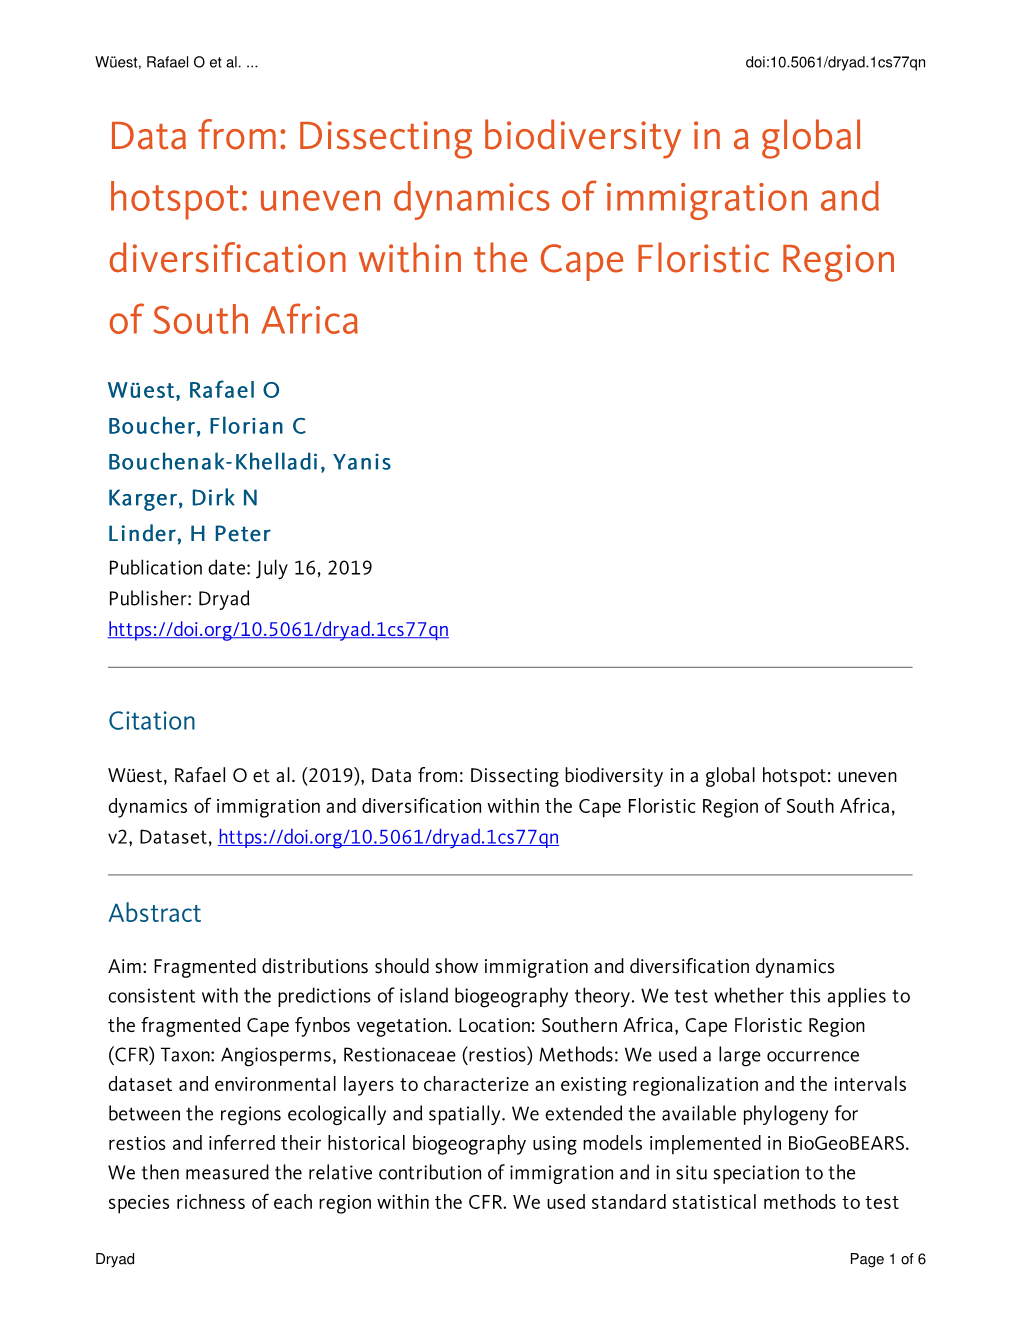 Dissecting Biodiversity in a Global Hotspot: Uneven Dynamics of Immigration and Diversification Within the Cape Floristic Region of South Africa